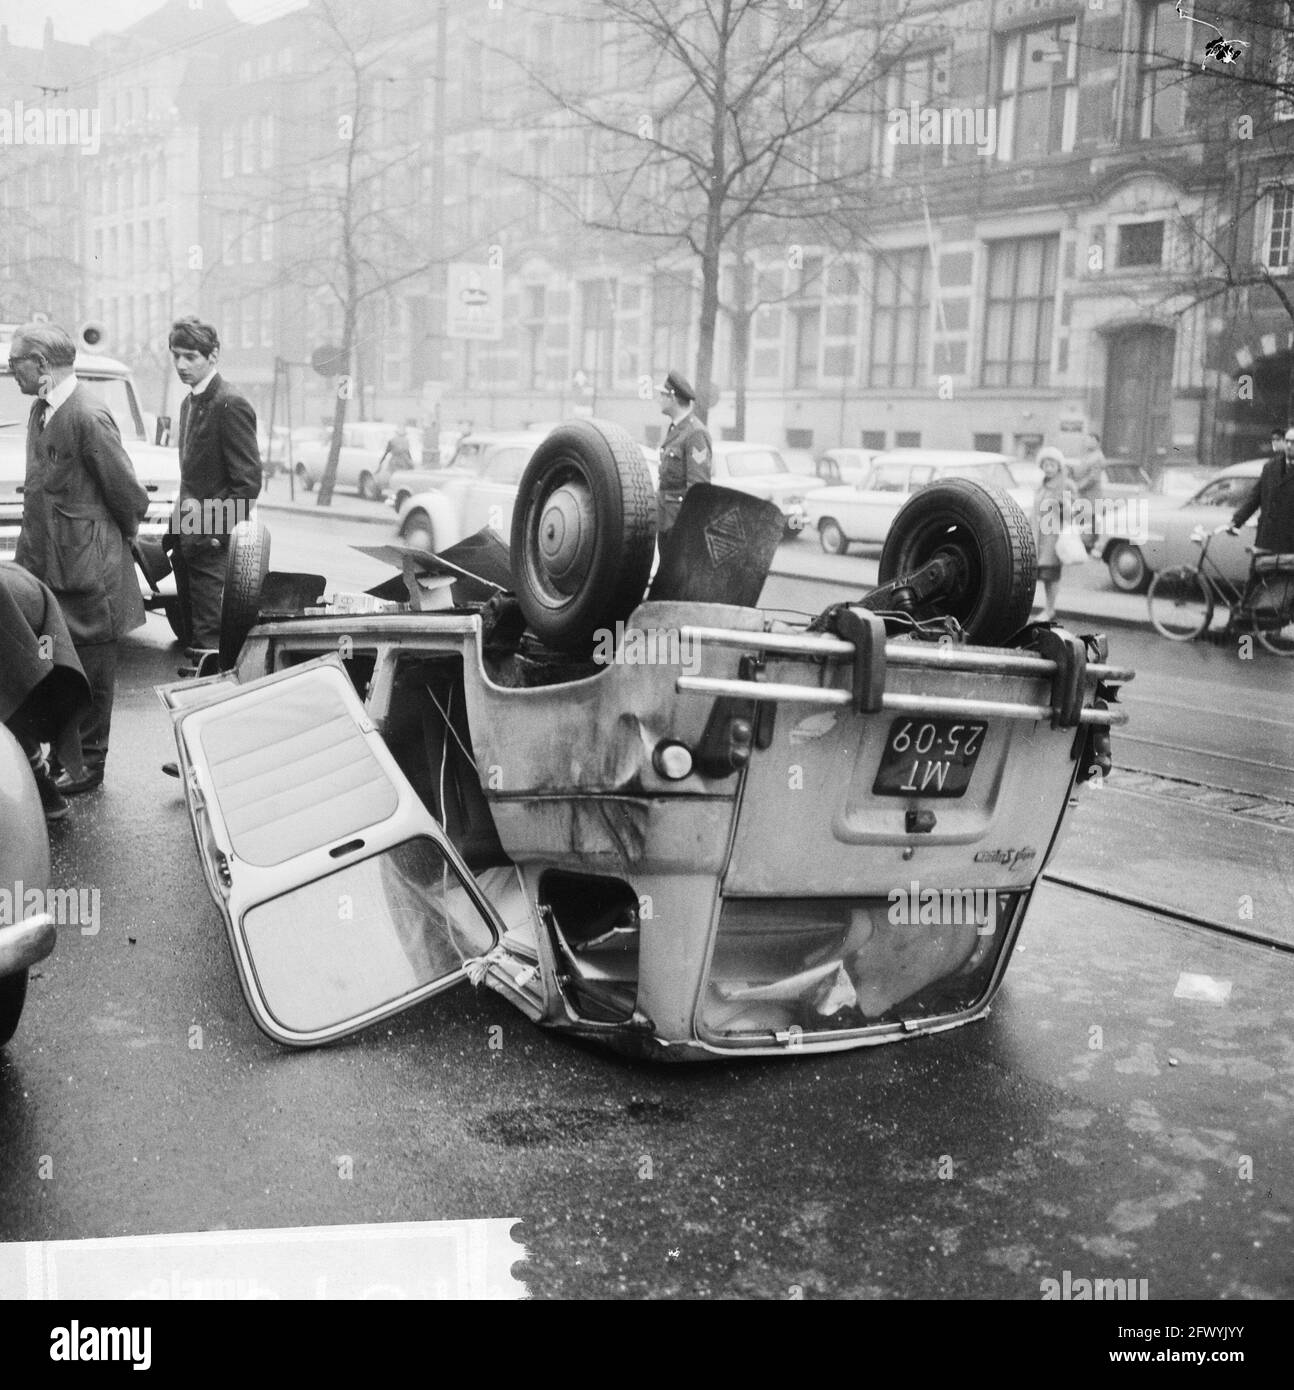 Car upside down on Rokin, exclusive Parool, January 22, 1966, Autos, The Netherlands, 20th century press agency photo, news to remember, documentary, historic photography 1945-1990, visual stories, human history of the Twentieth Century, capturing moments in time Stock Photo